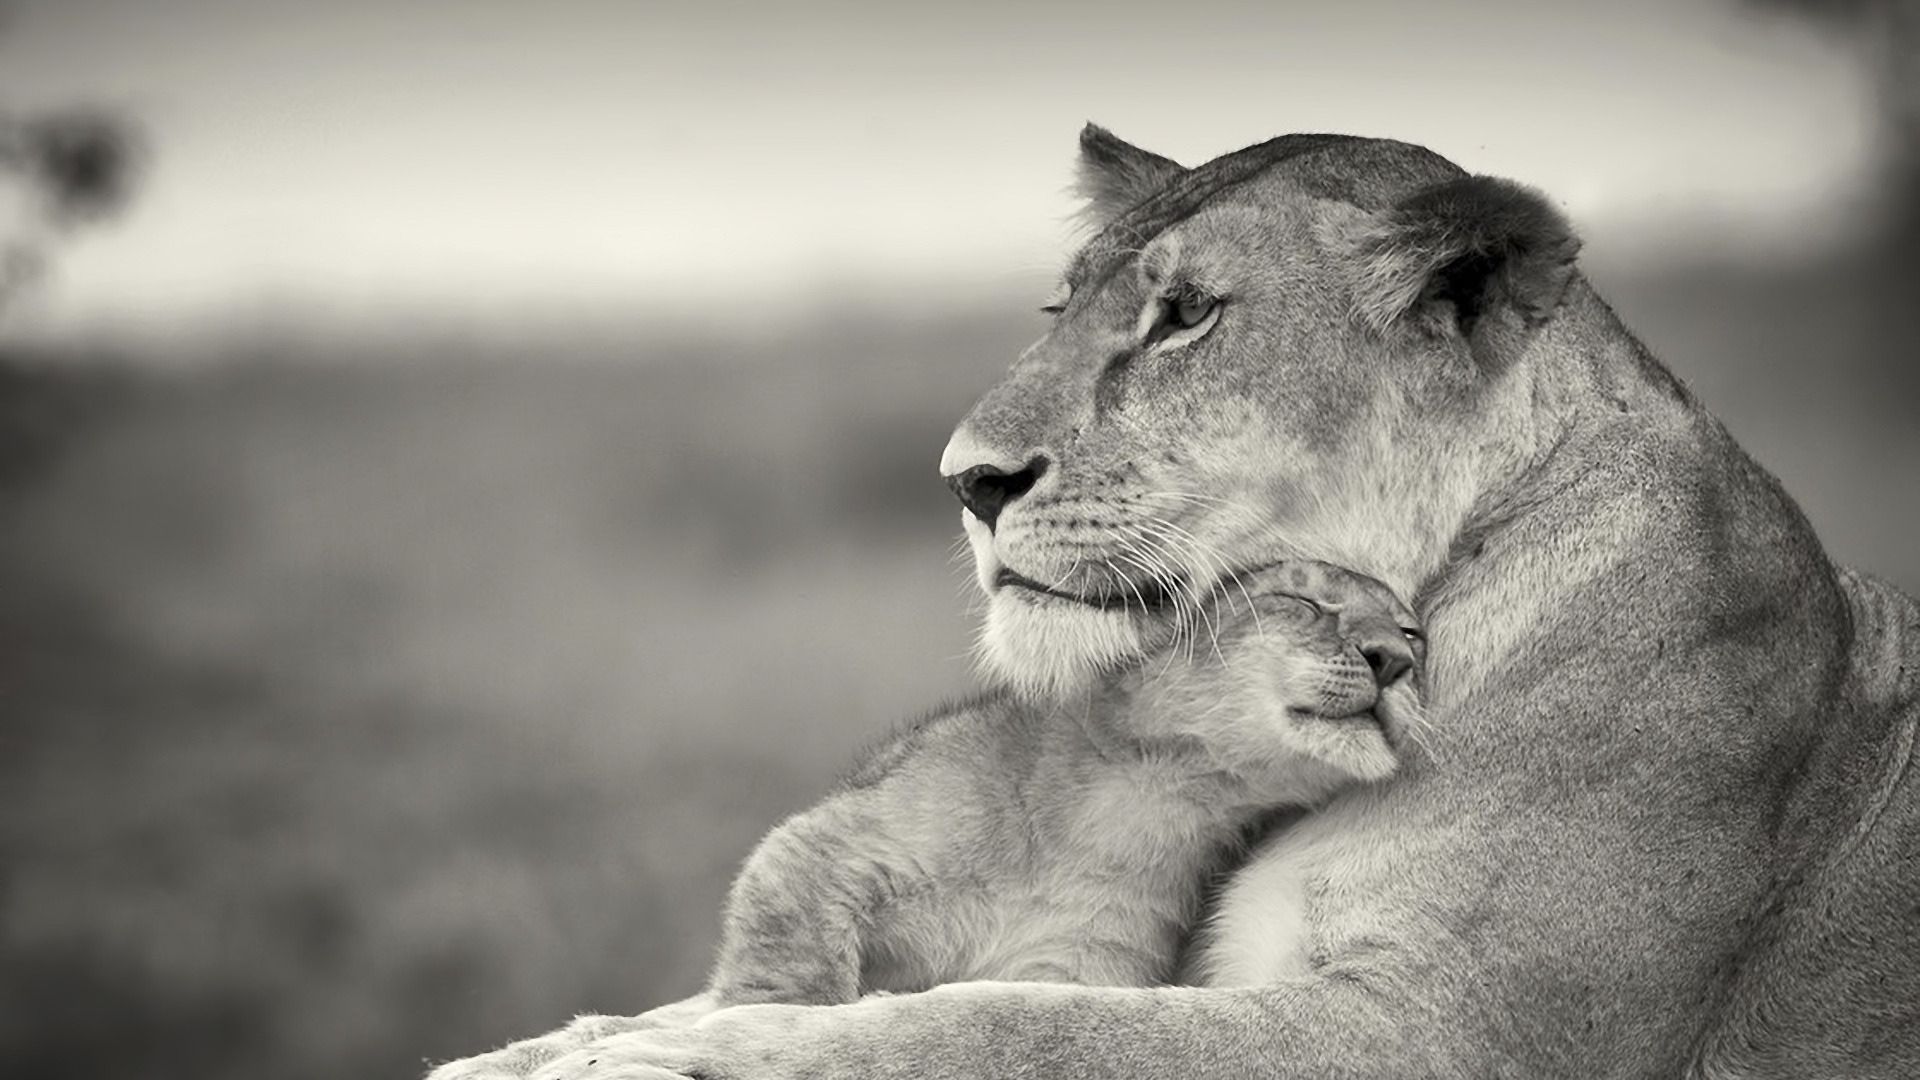 Download Wallpaper 1920x1080 Lioness, Lion, White, Animal, Family ...